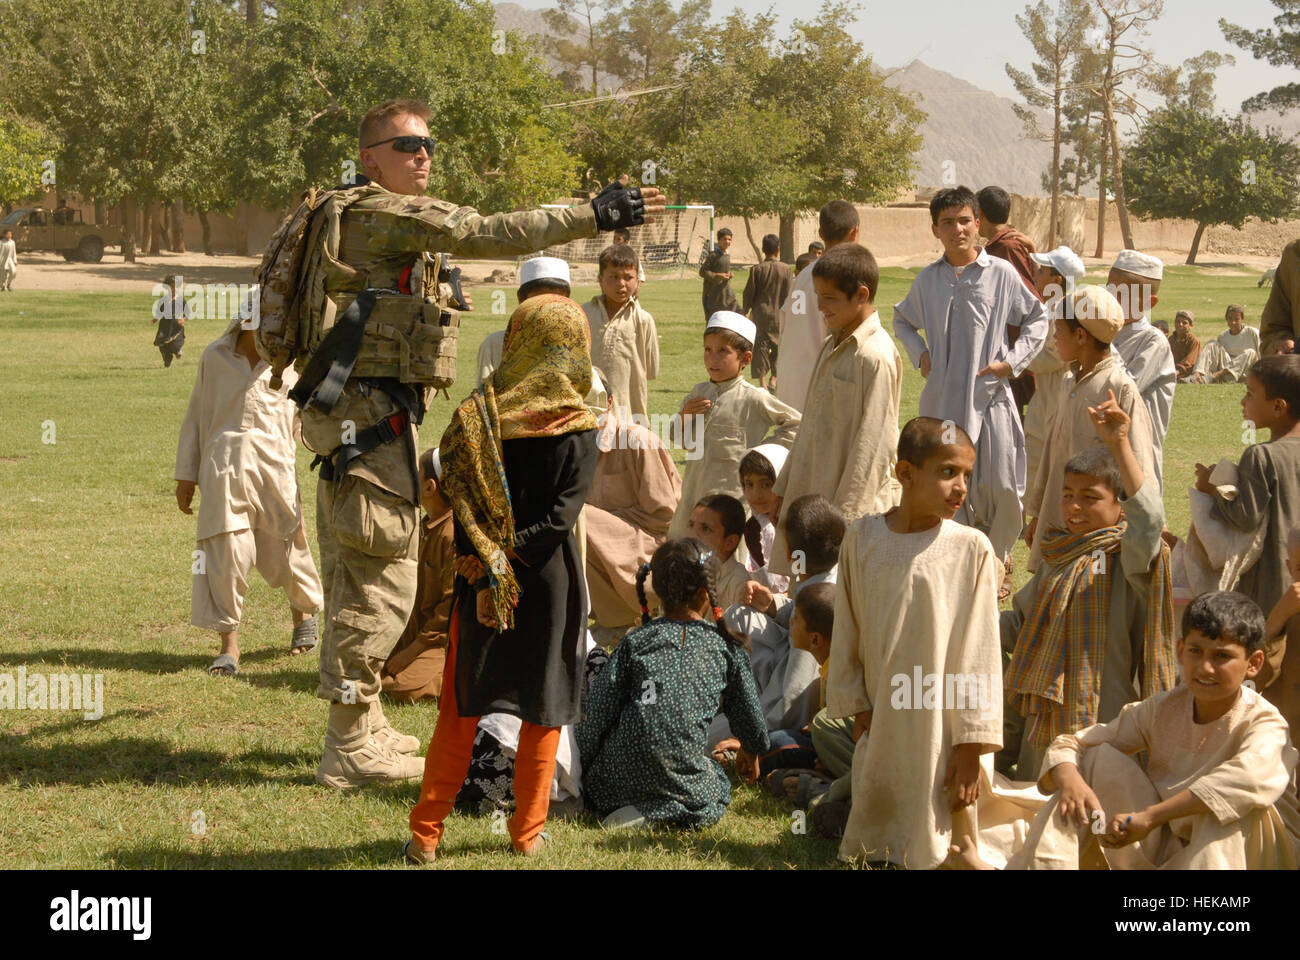 KANDAHAR, Afghanistan – Staff Sgt. Mark Masters, currently assigned to 1st Brigade Combat Team, Task Force ‘Raider’, 4th Infantry Division, directs a group of local children to where they can watch a soccer game between two local teams June 8. The game occurred after a ribbon cutting ceremony which signified the official opening of a new soccer field in sub district one of Kandahar City. The new field was one of many projects headed by TF ‘Raider’ and their Afghan National Security Forces partners in their joint-reconstruction efforts to improve quality of life, safety and security for residen Stock Photo